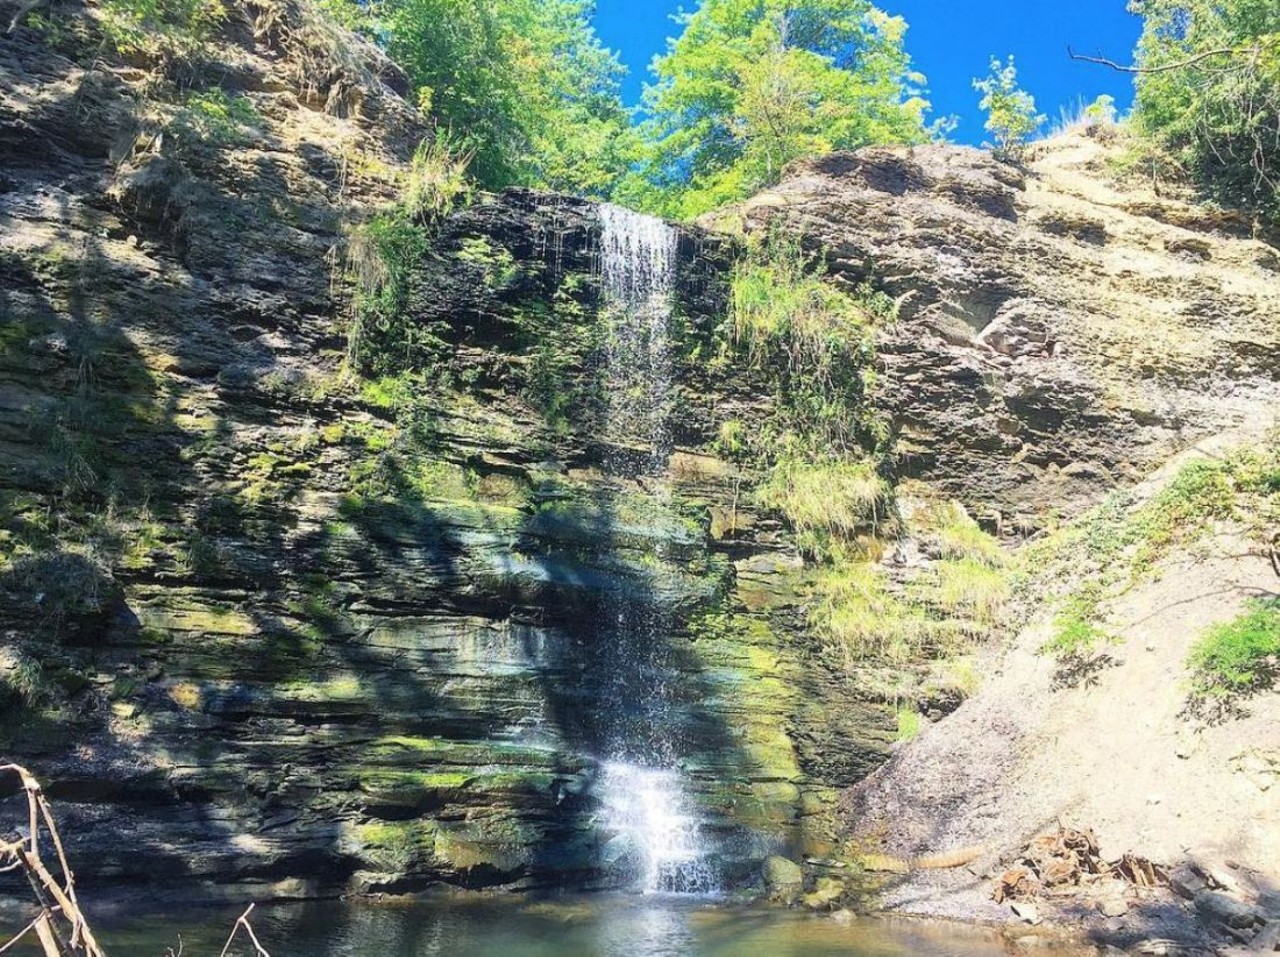  Black River Reservation
1750 Ford Rd., 440-458-5121
Black River Reservation is a popular picnic spot and packed with great trails, the most popular being Bridgeway and Steel Mill Trail. 
Photo via citytosummitexplorers/Instagram